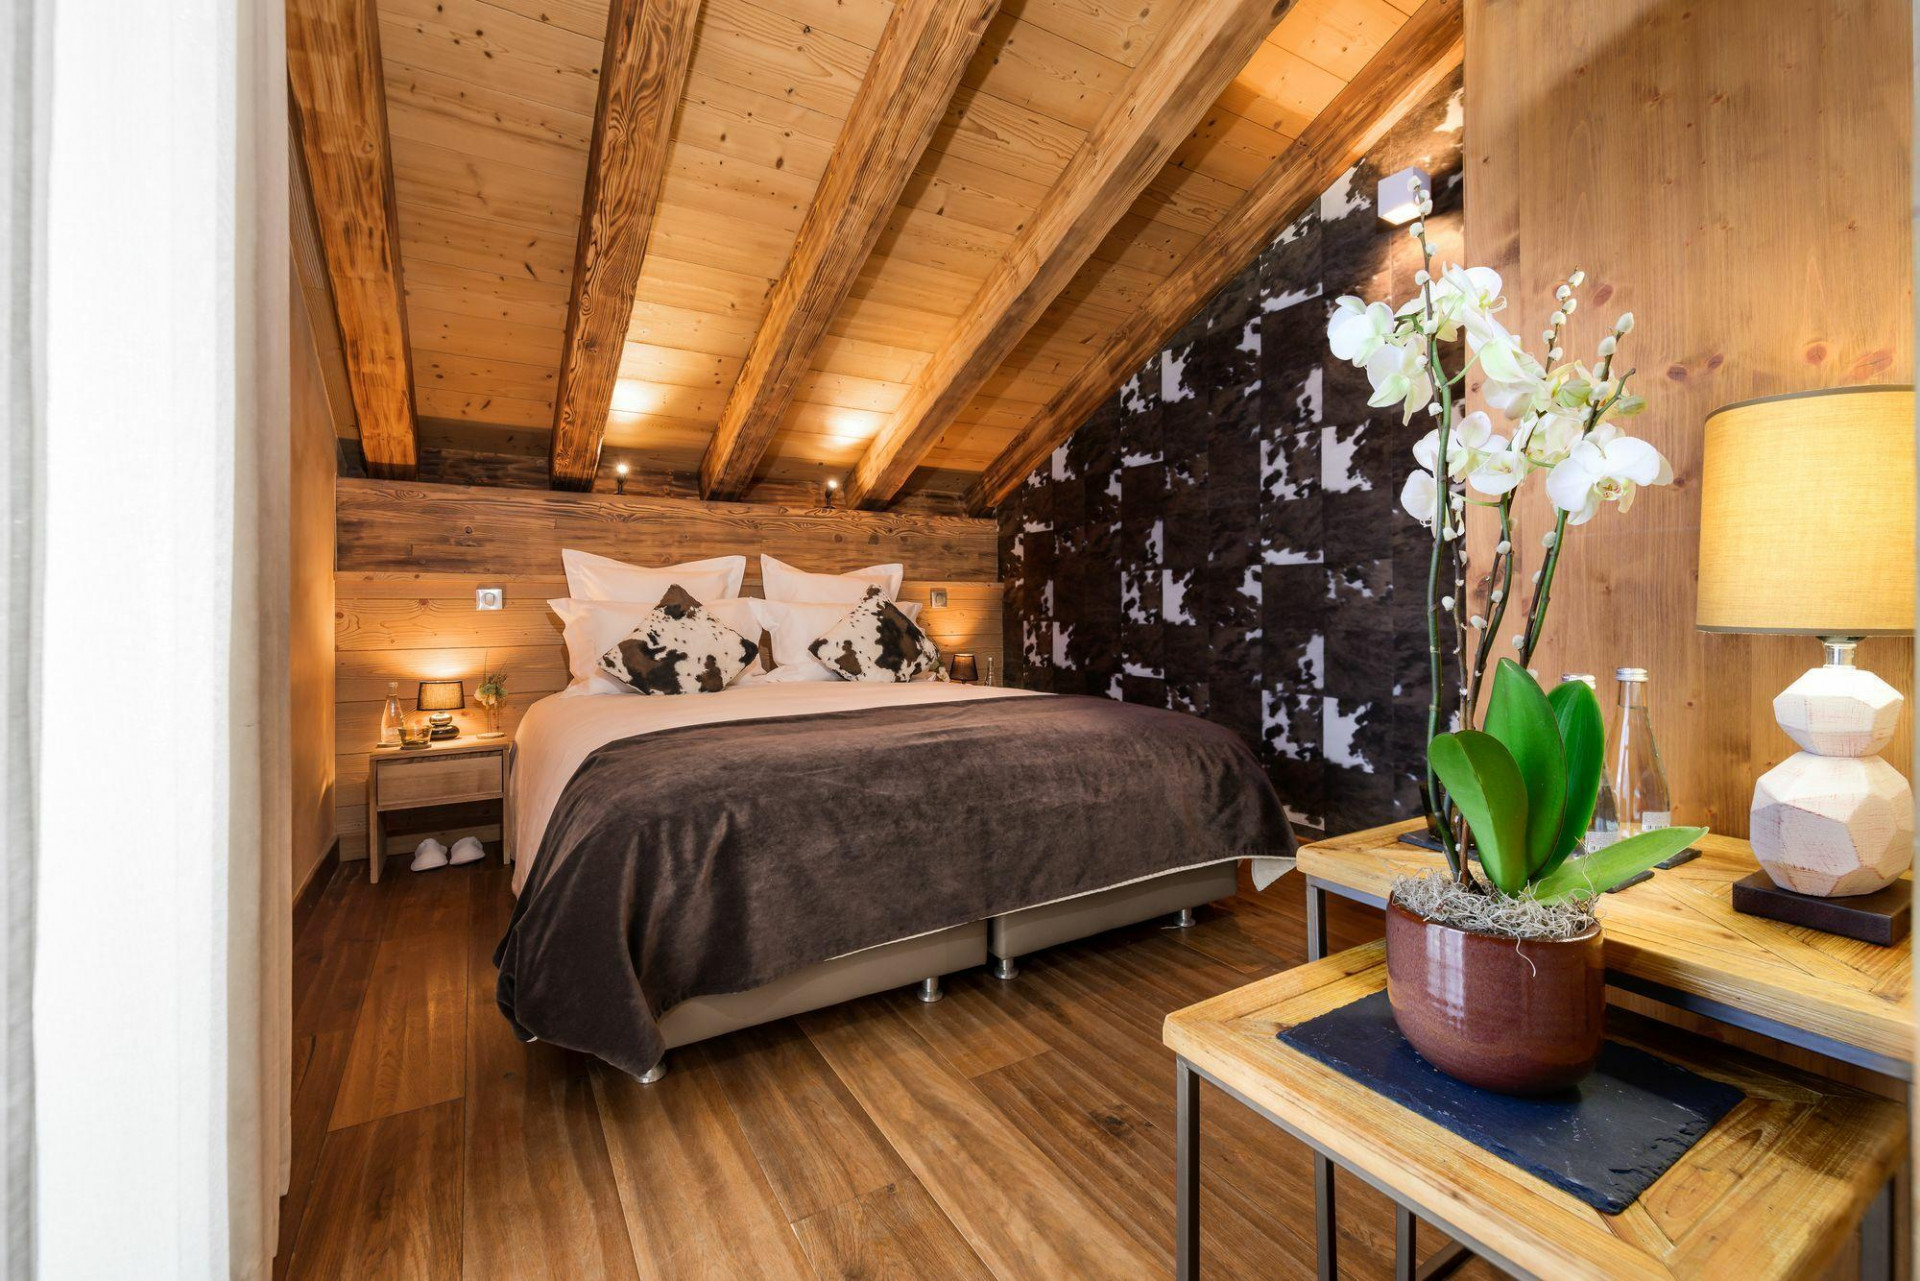 courchevel-1300-location-chalet-luxe-tilute